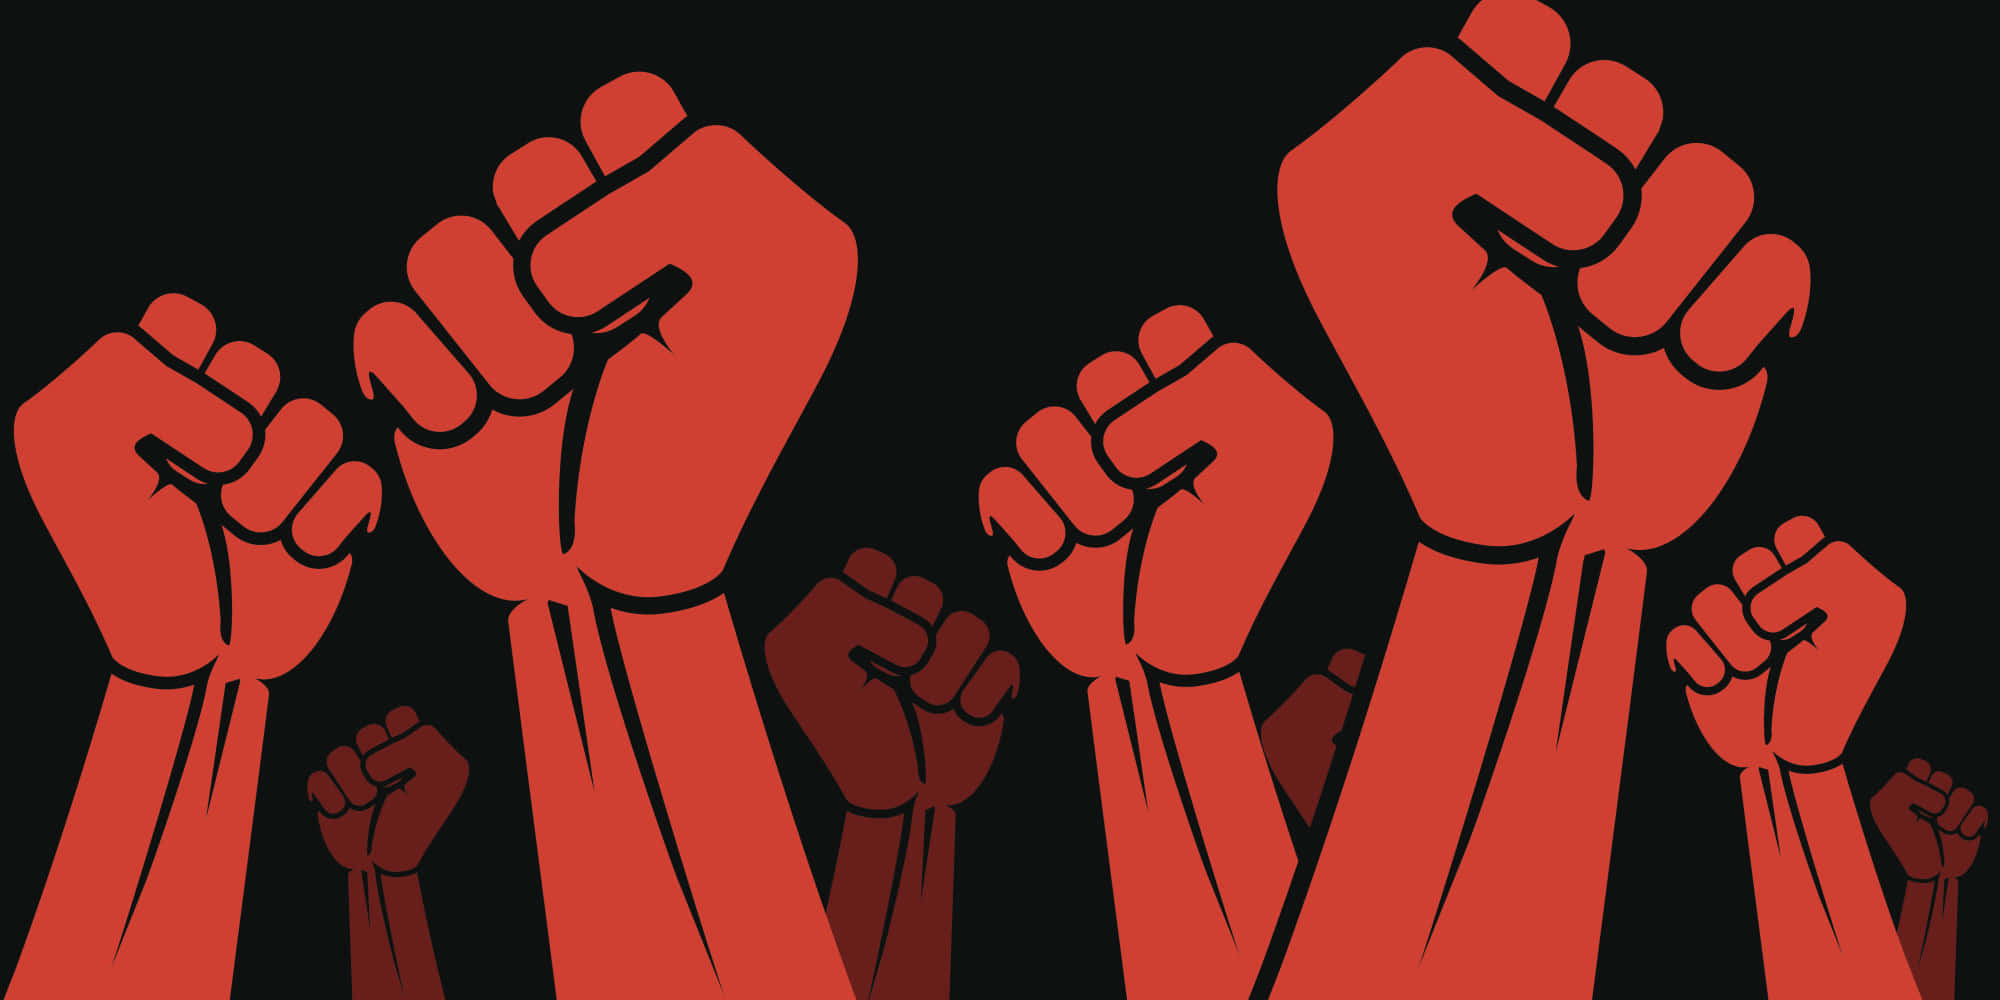 “We will not be silenced. We will rise in power.” Wallpaper